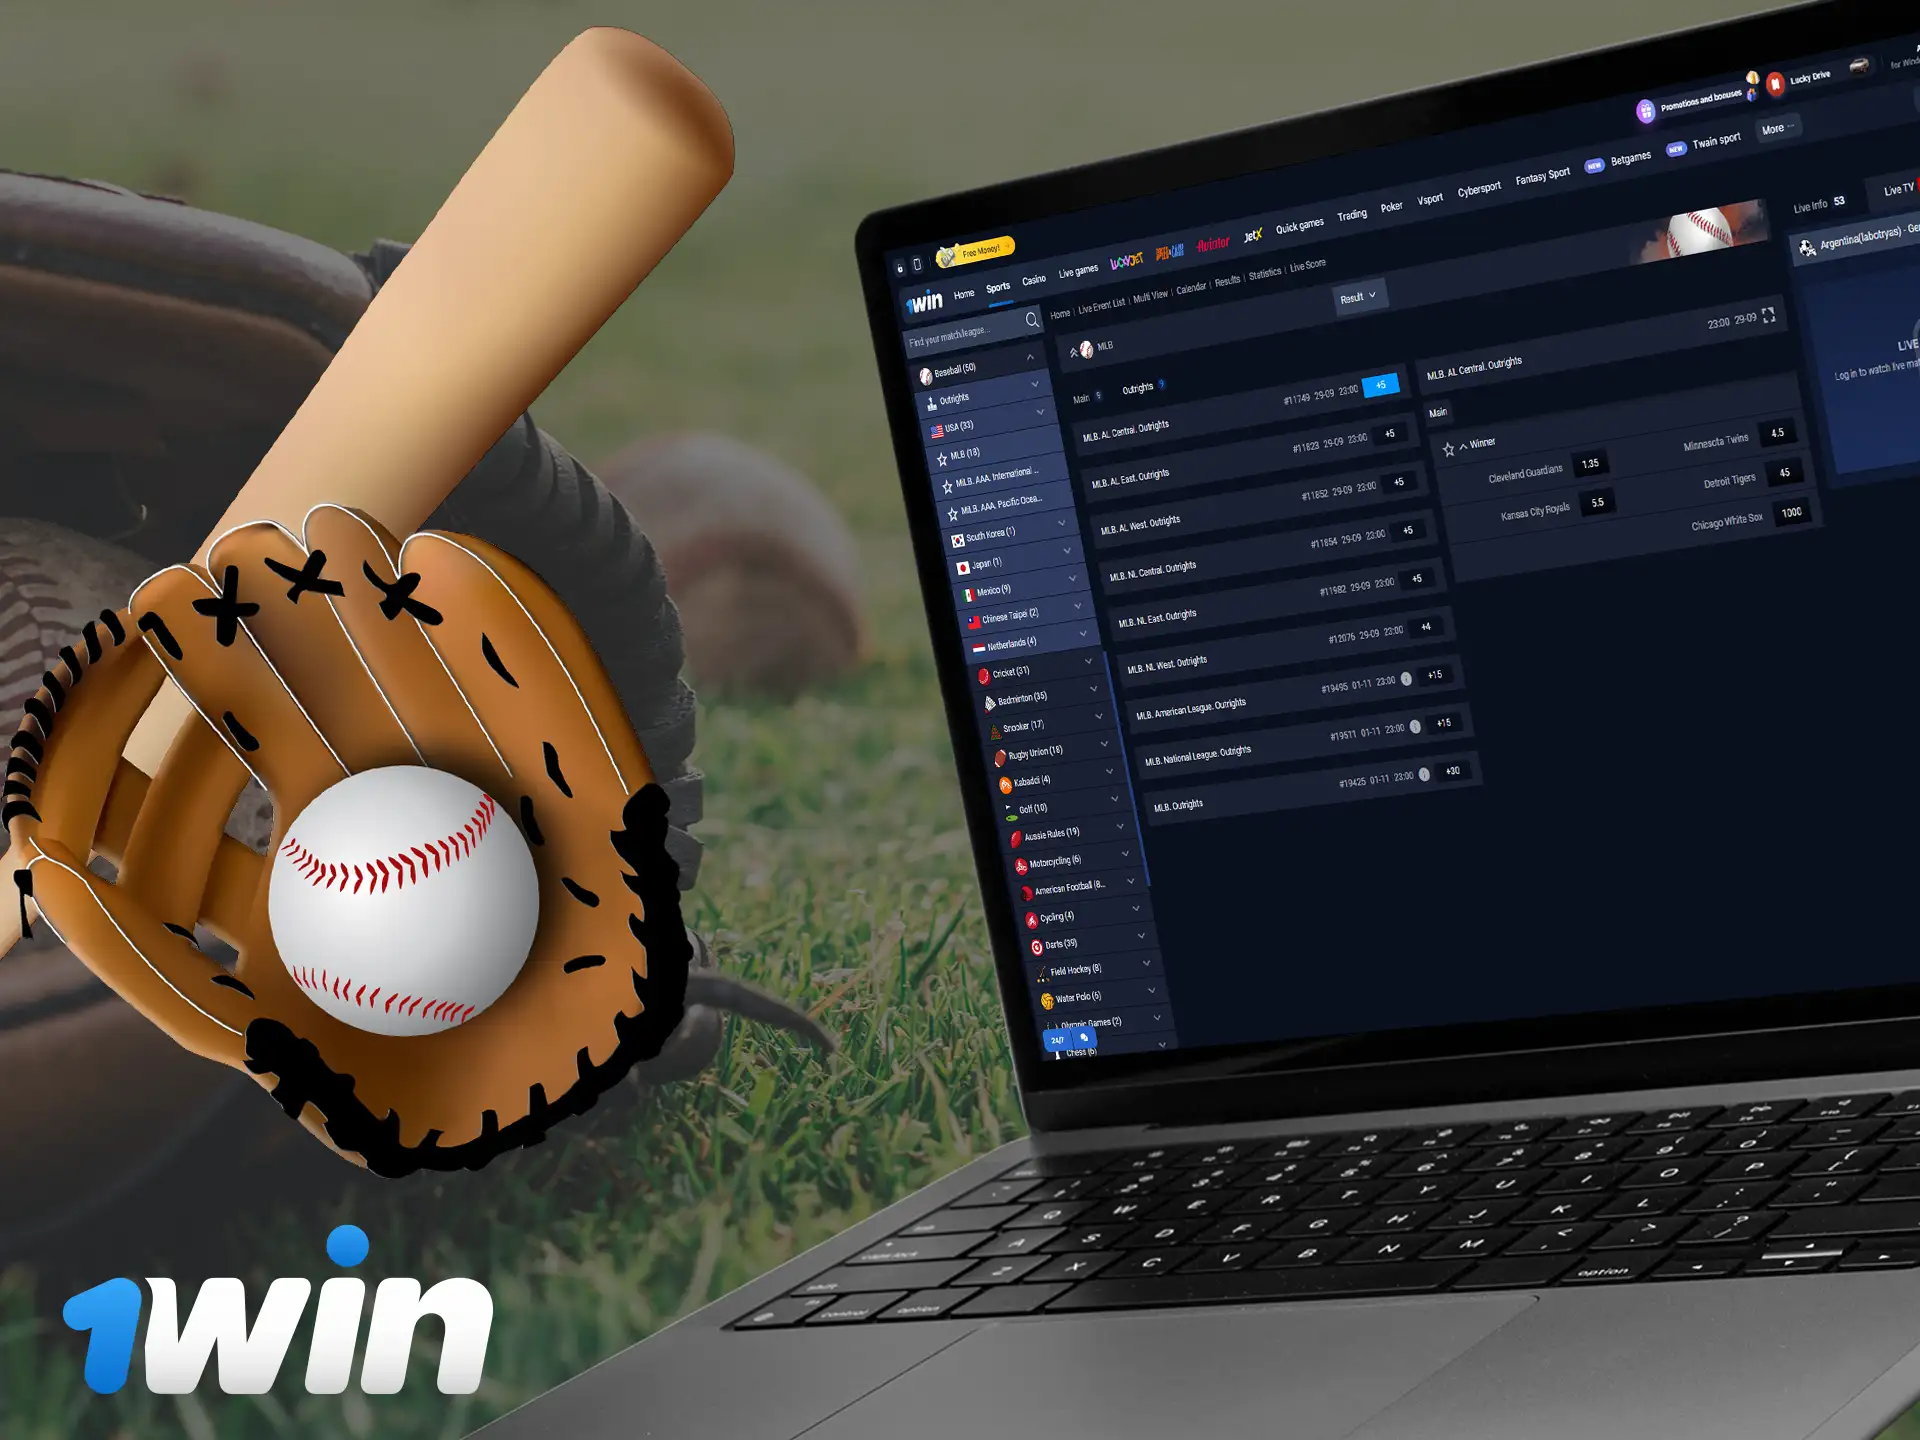 Baseball captivates 1Win users with strategy and excitement.